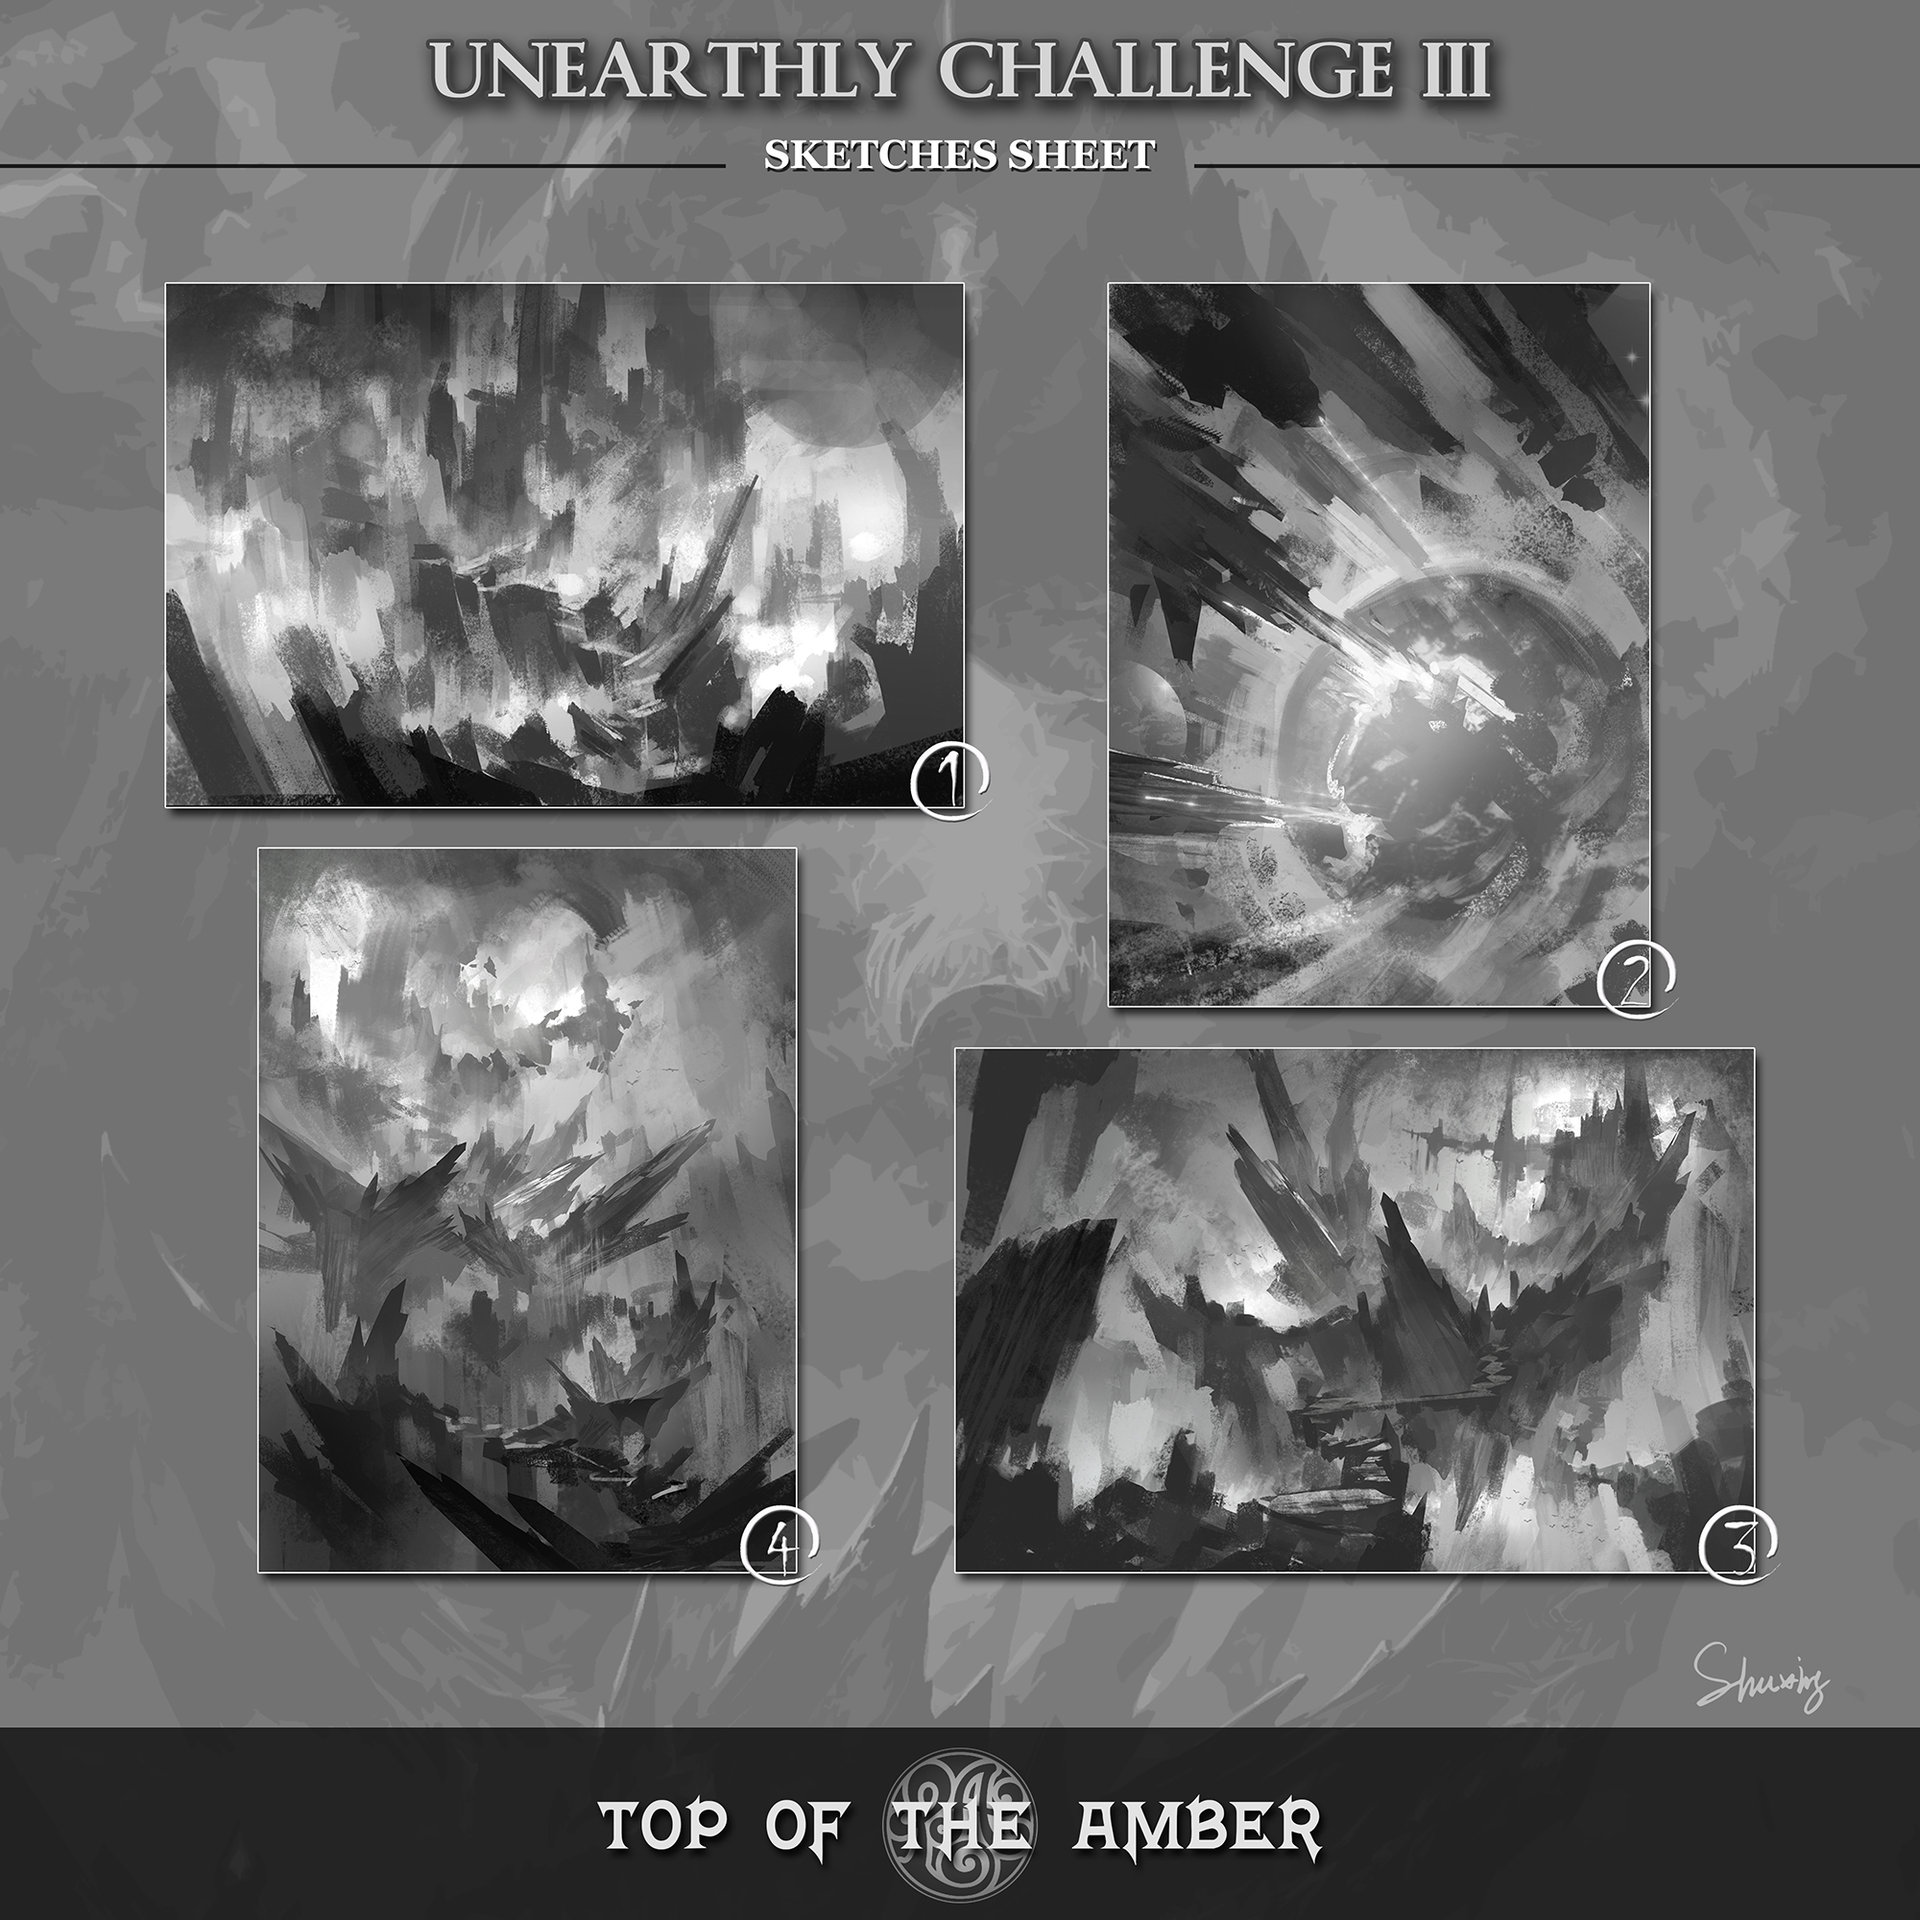 ArtStation - Top Of The Amber(Sketches Sheet)